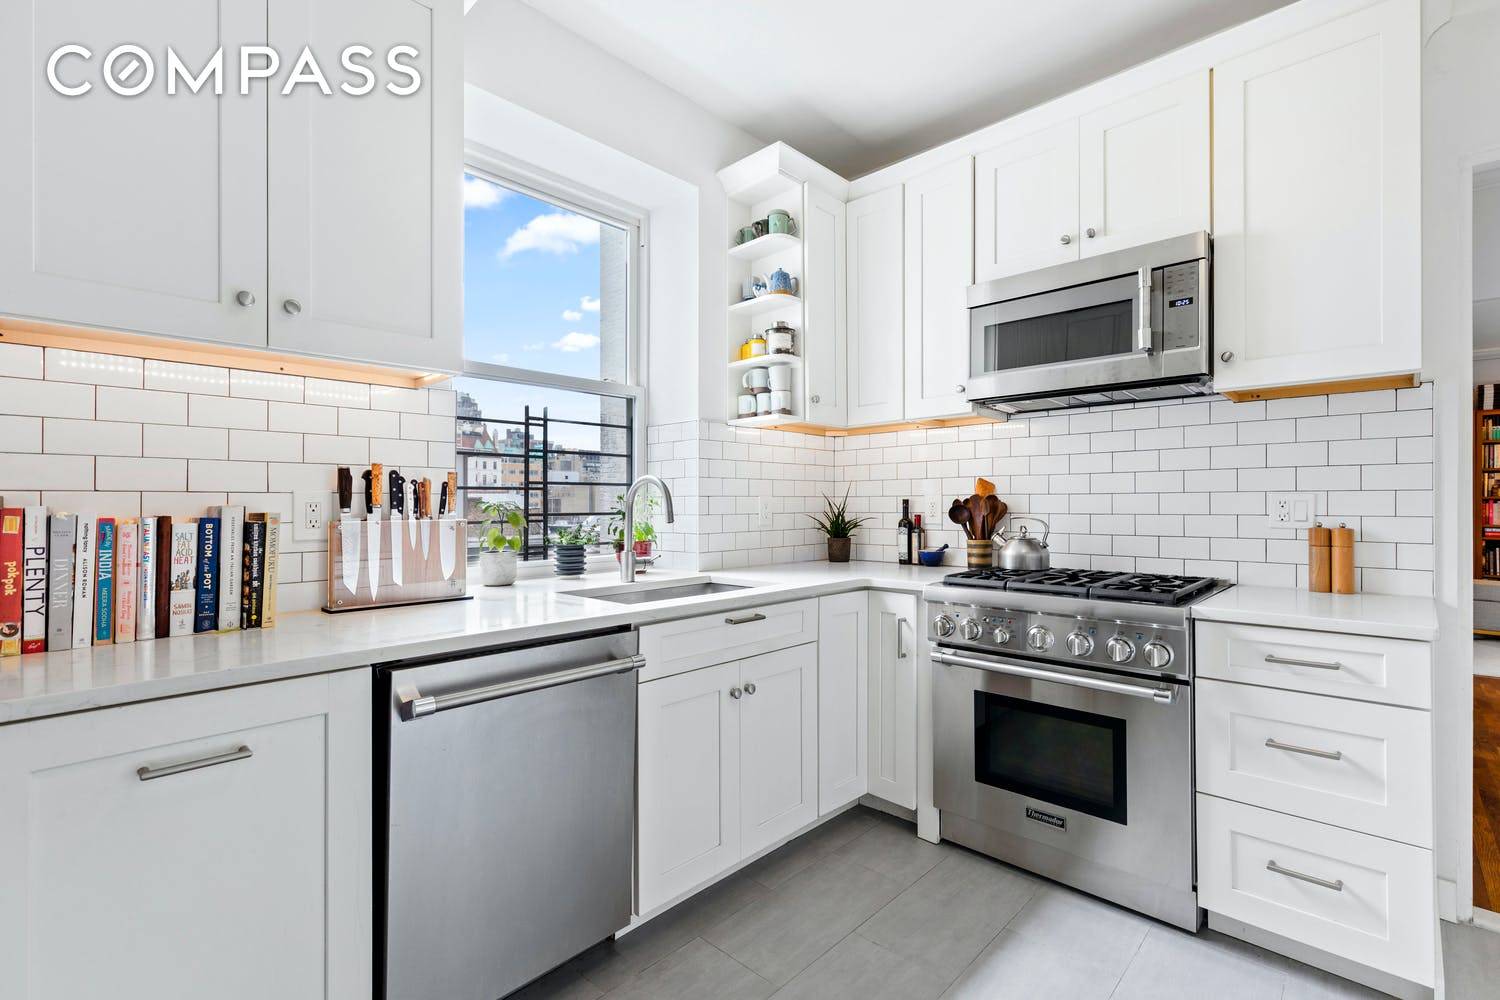 2 bed, 1. 5 bath co op in a pre war elevator building in prime Brooklyn Heights with a beautifully renovated kitchen !